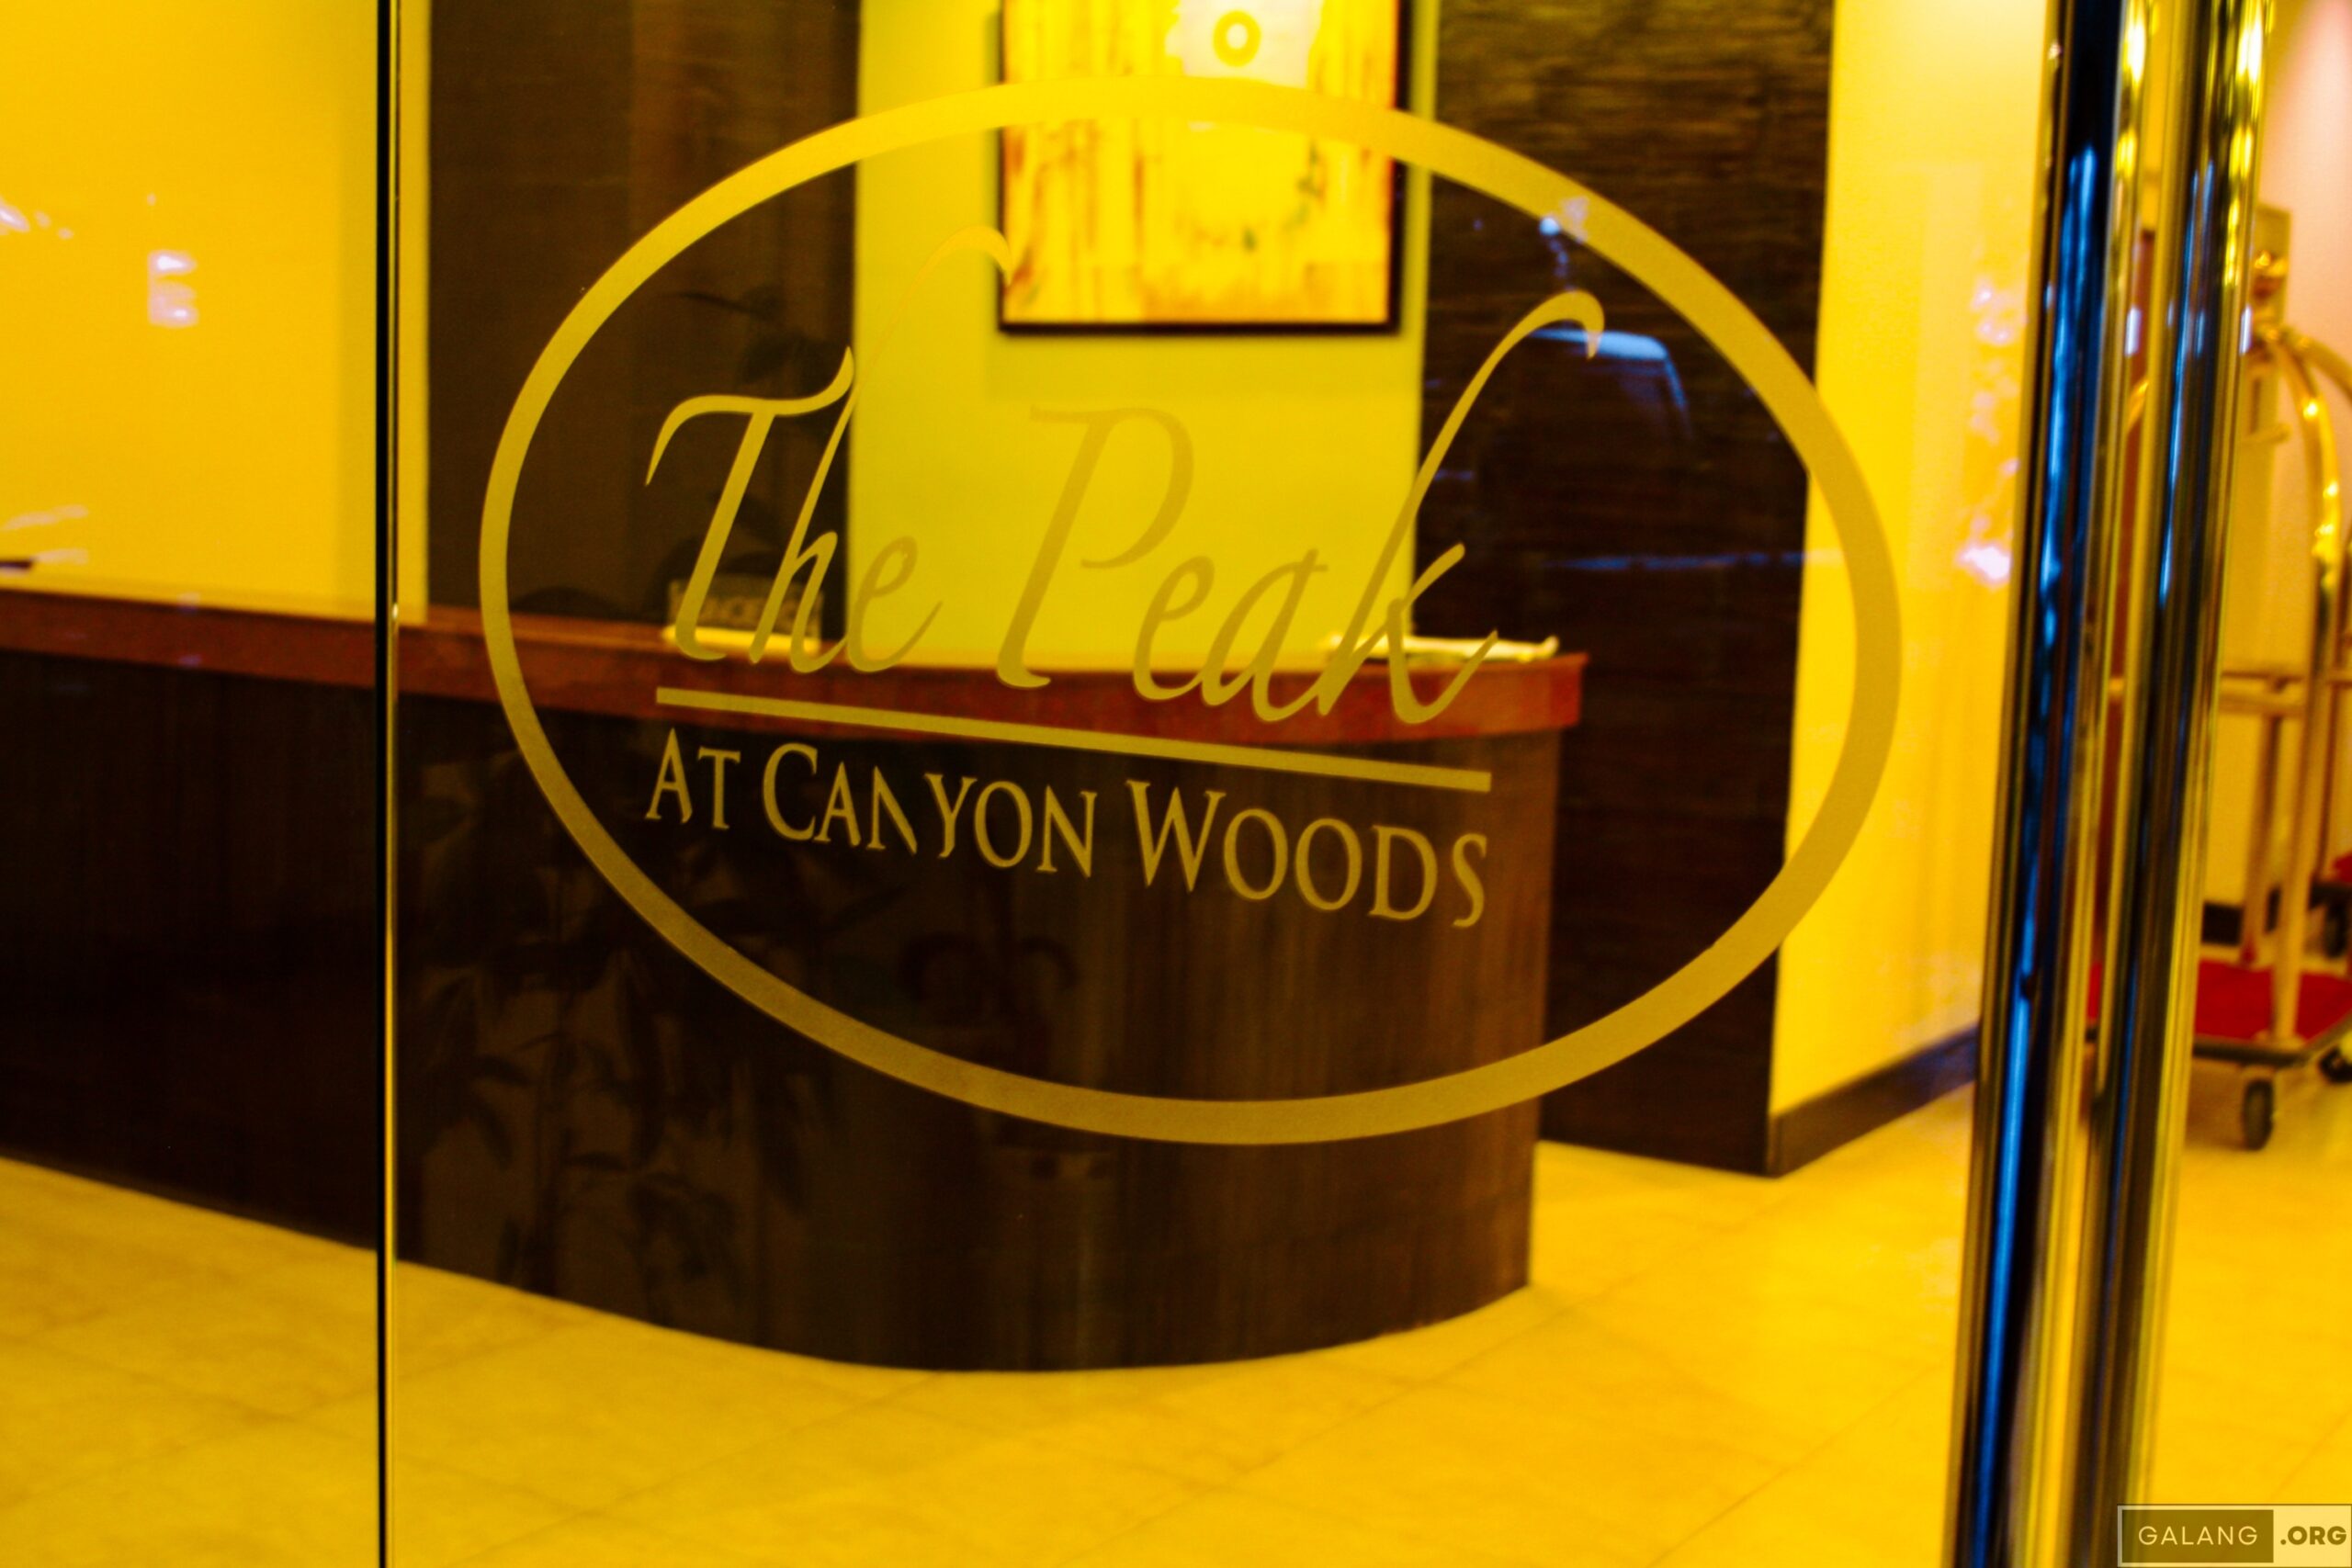 The Peak at Canyon Woods